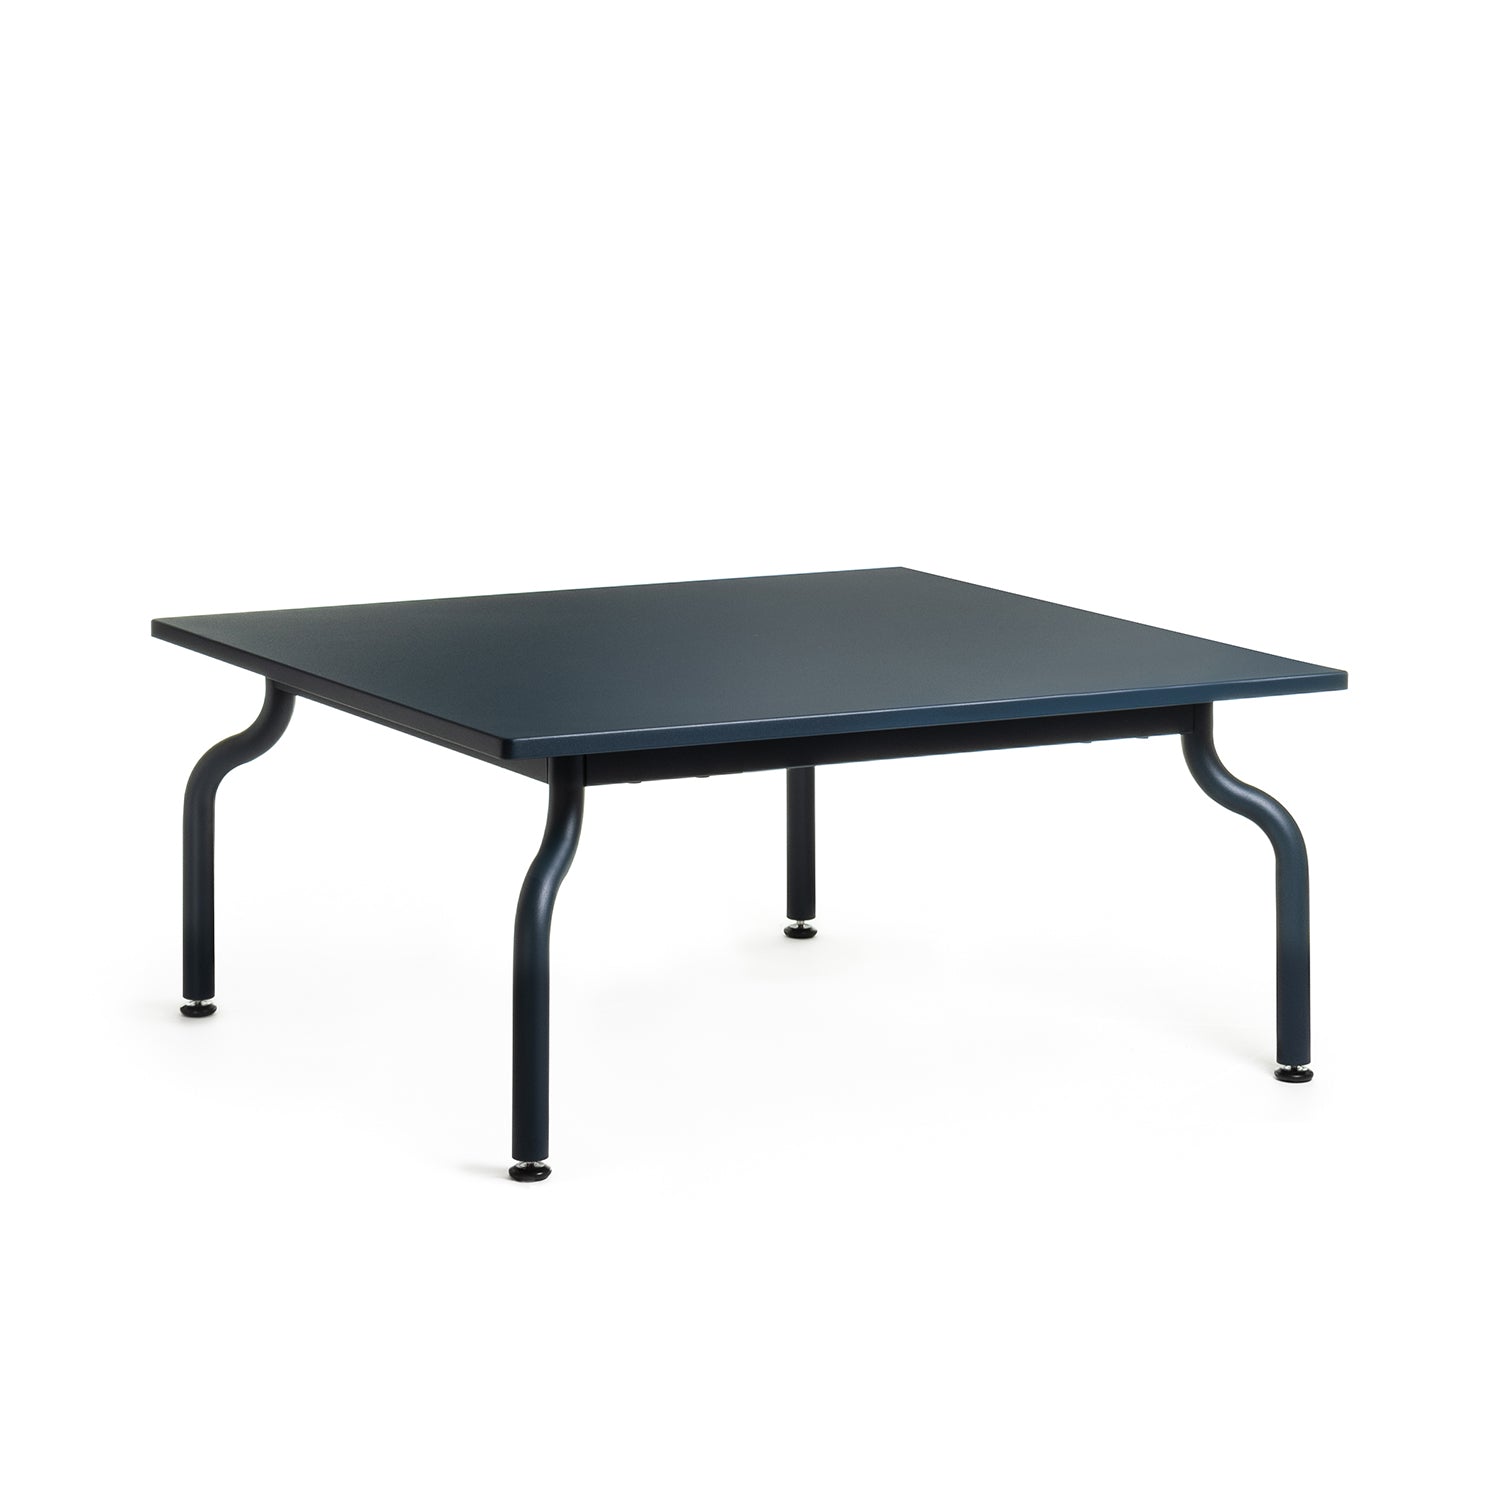 Magis South low table in night blue